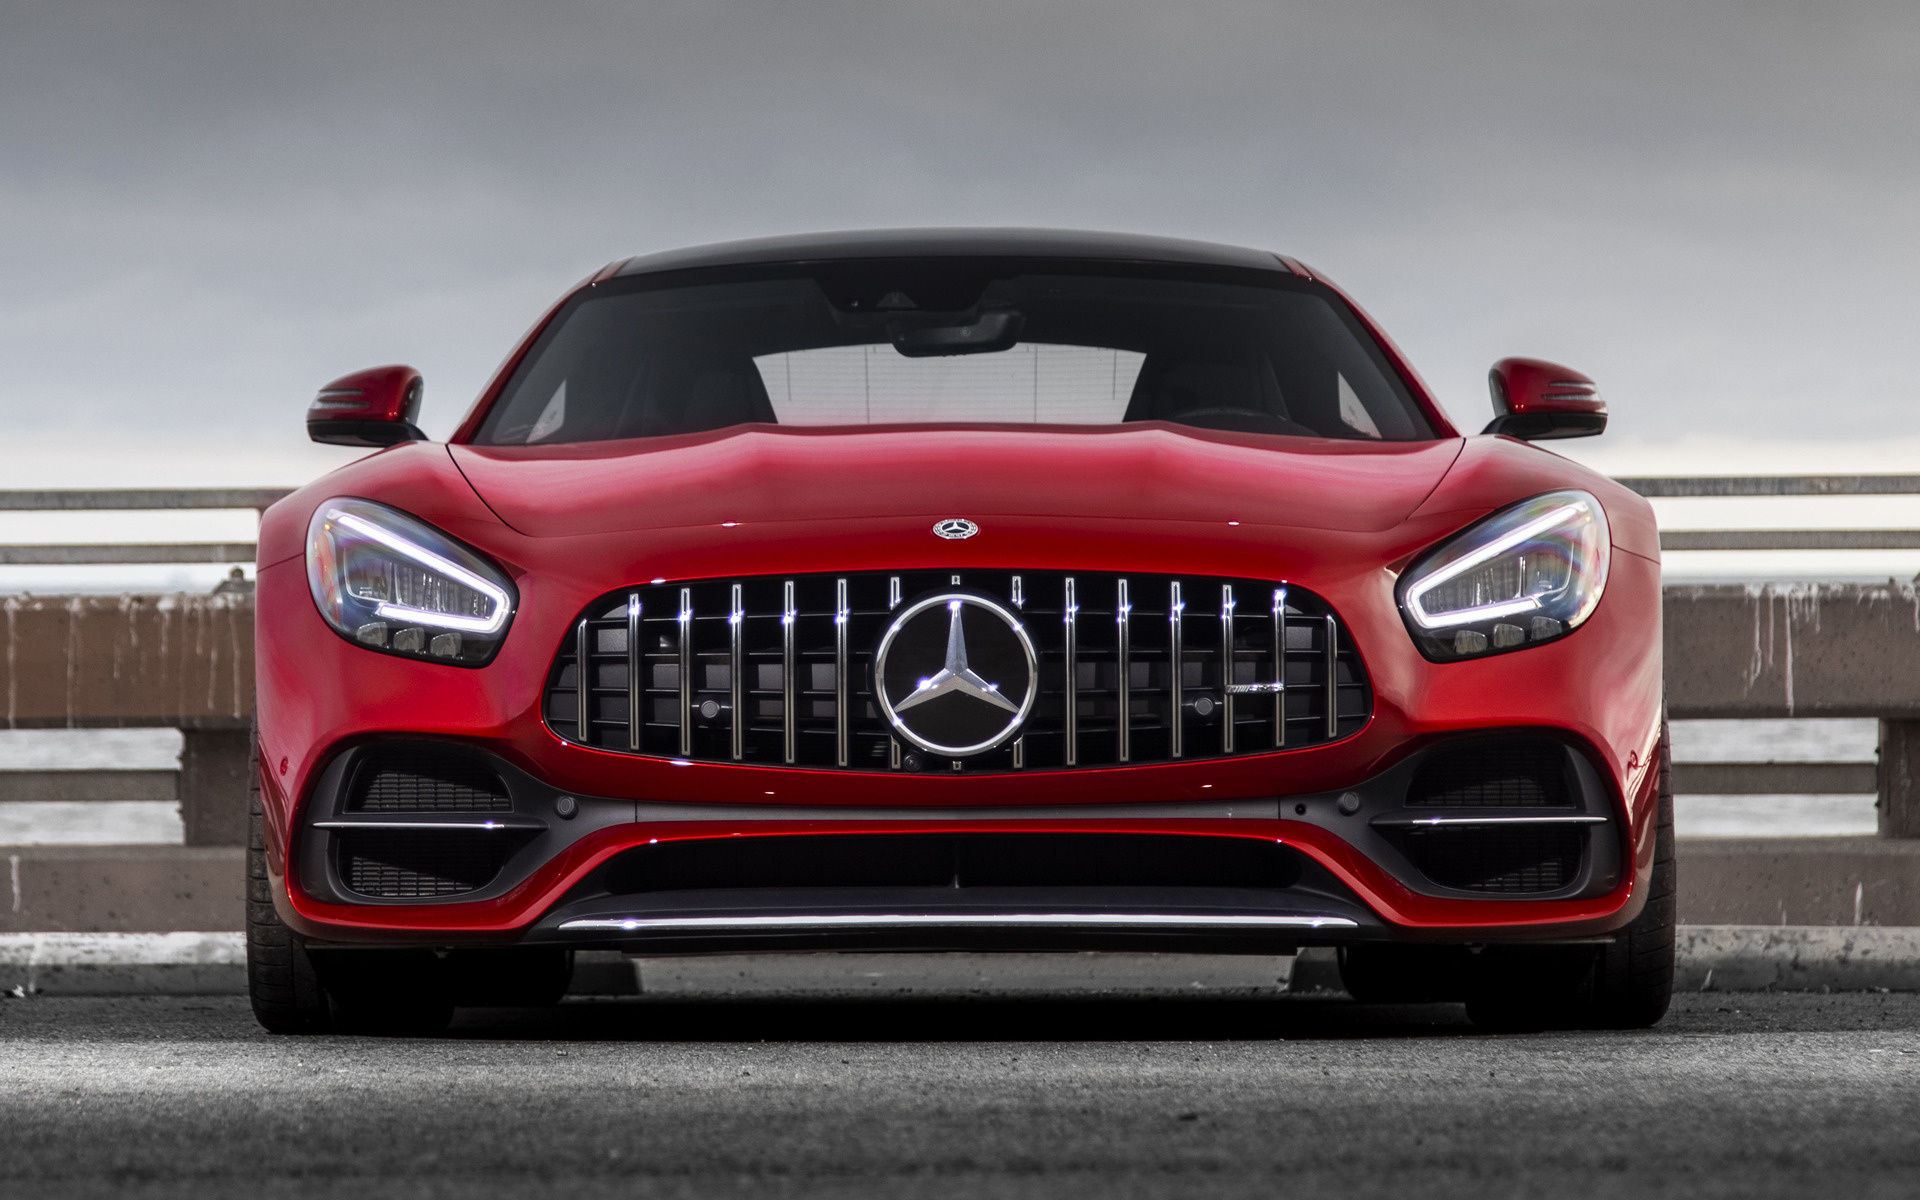 2020 Mercedes-AMG GT C (US) - Wallpapers and HD Images | Car Pixel